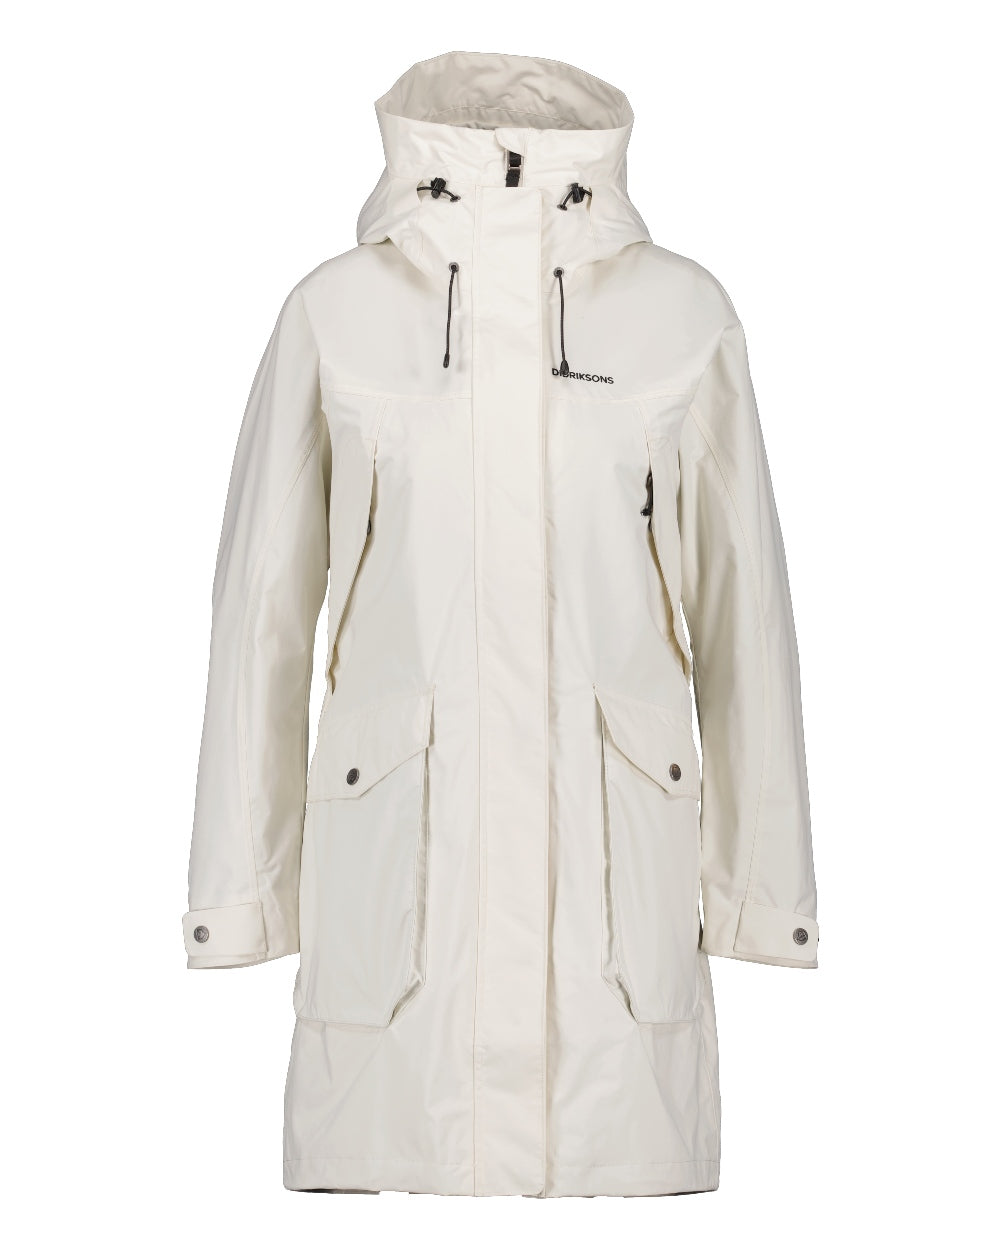 Didriksons Thelma Womens Parka 10 in White Foam 